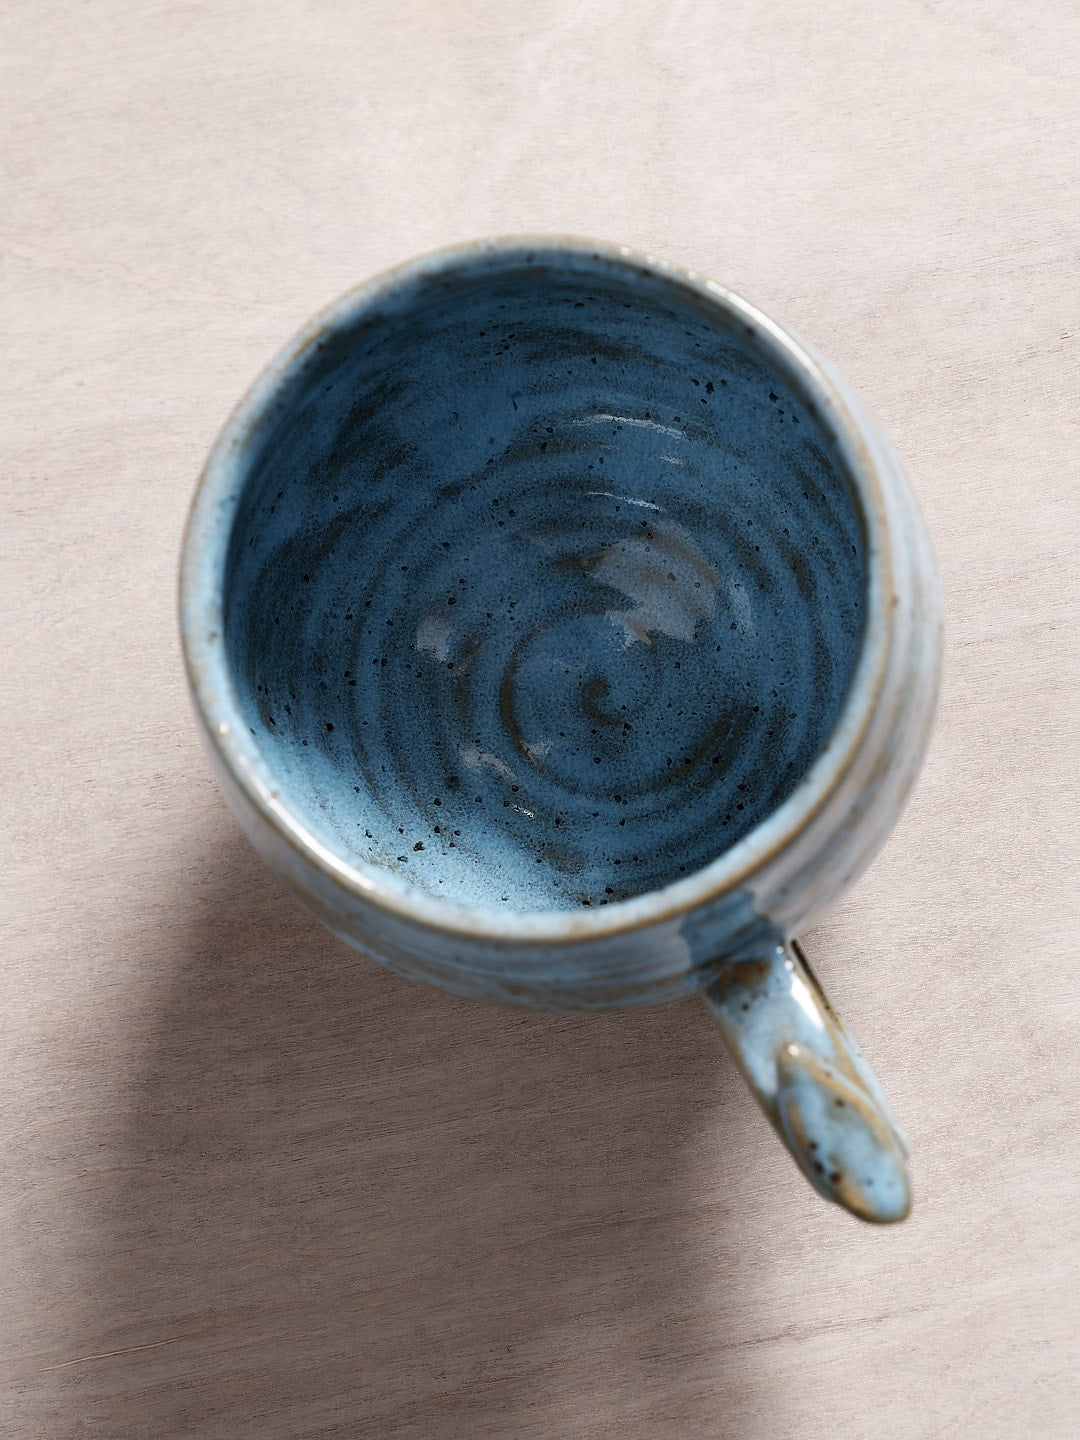 A Bird Handle Cup - Sky Blue from Jino Ceramic Studio sitting on top of a wooden table.